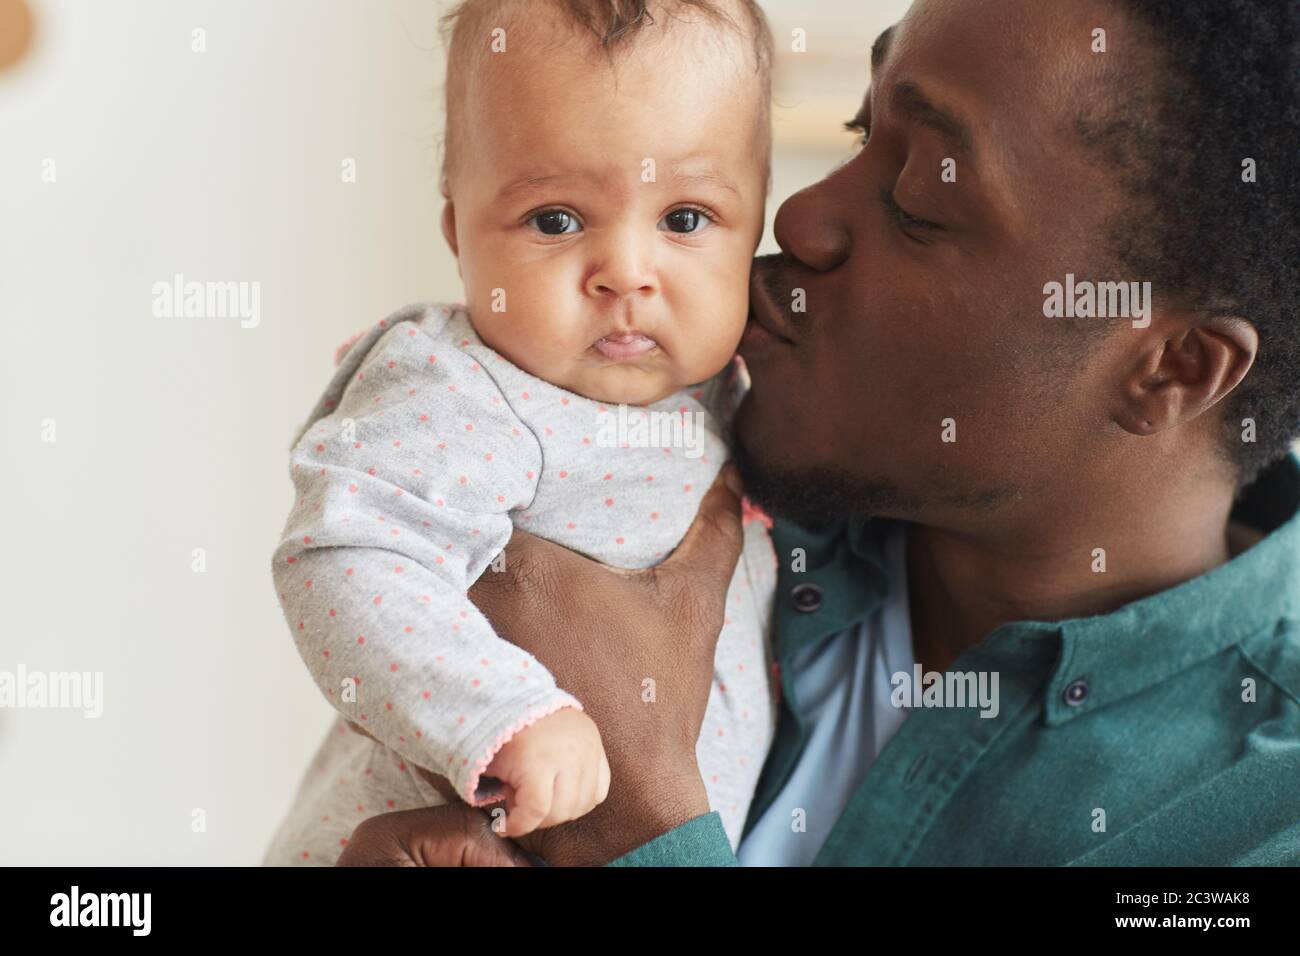 Close up portrait of happy African-American man kissing cute baby boy while holding him, copy space Stock Photo